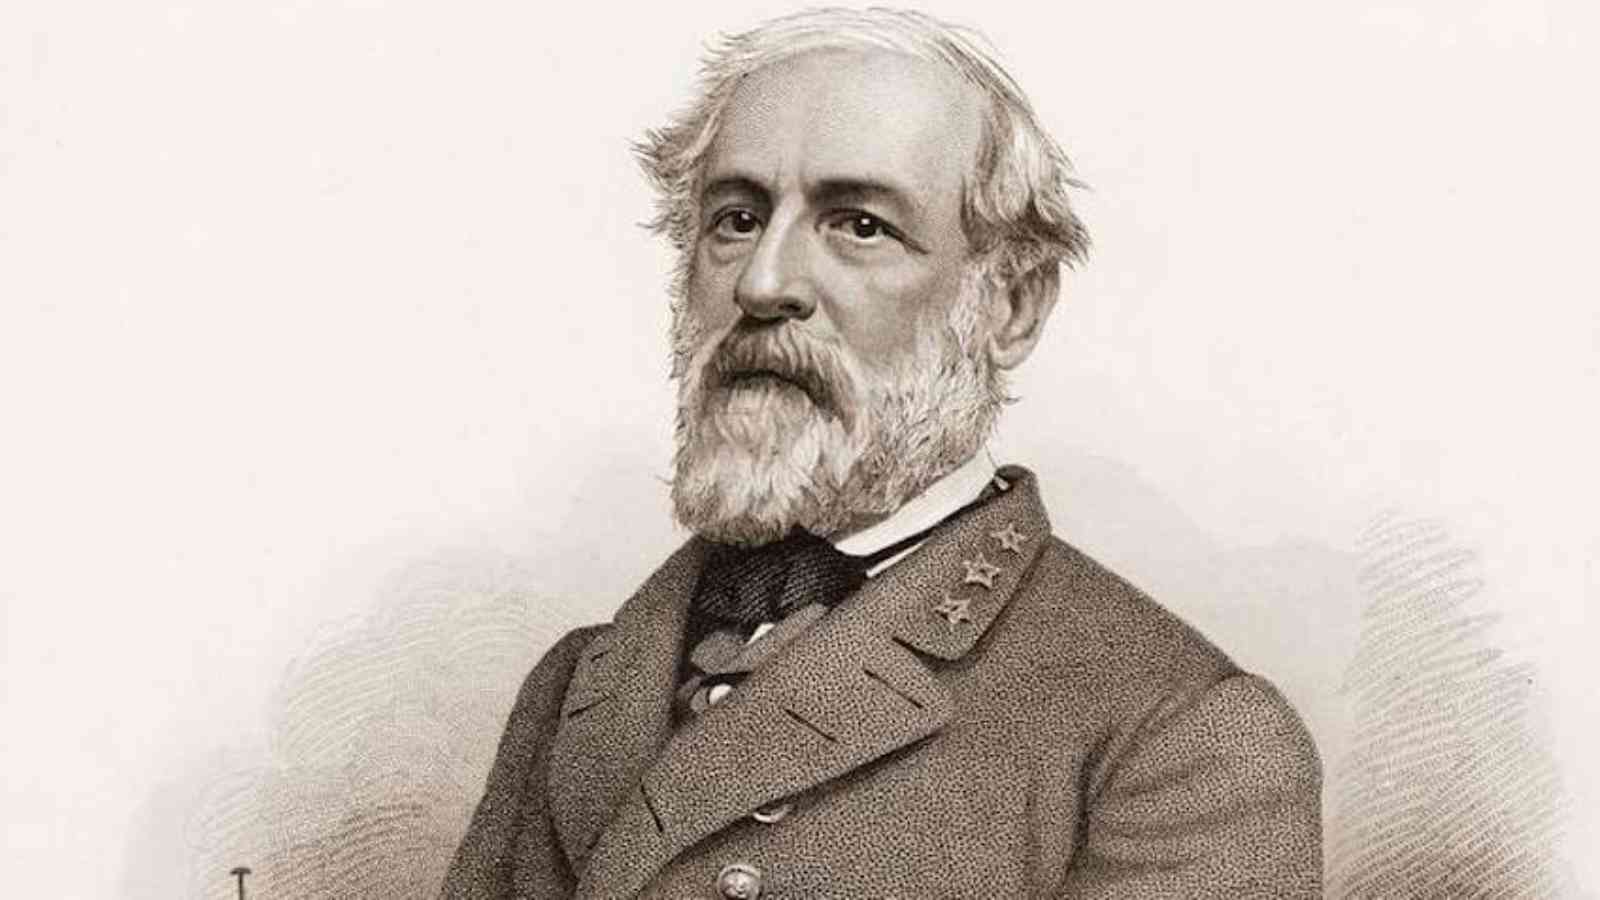 Robert E Lee Day 2023: Date, History and Facts